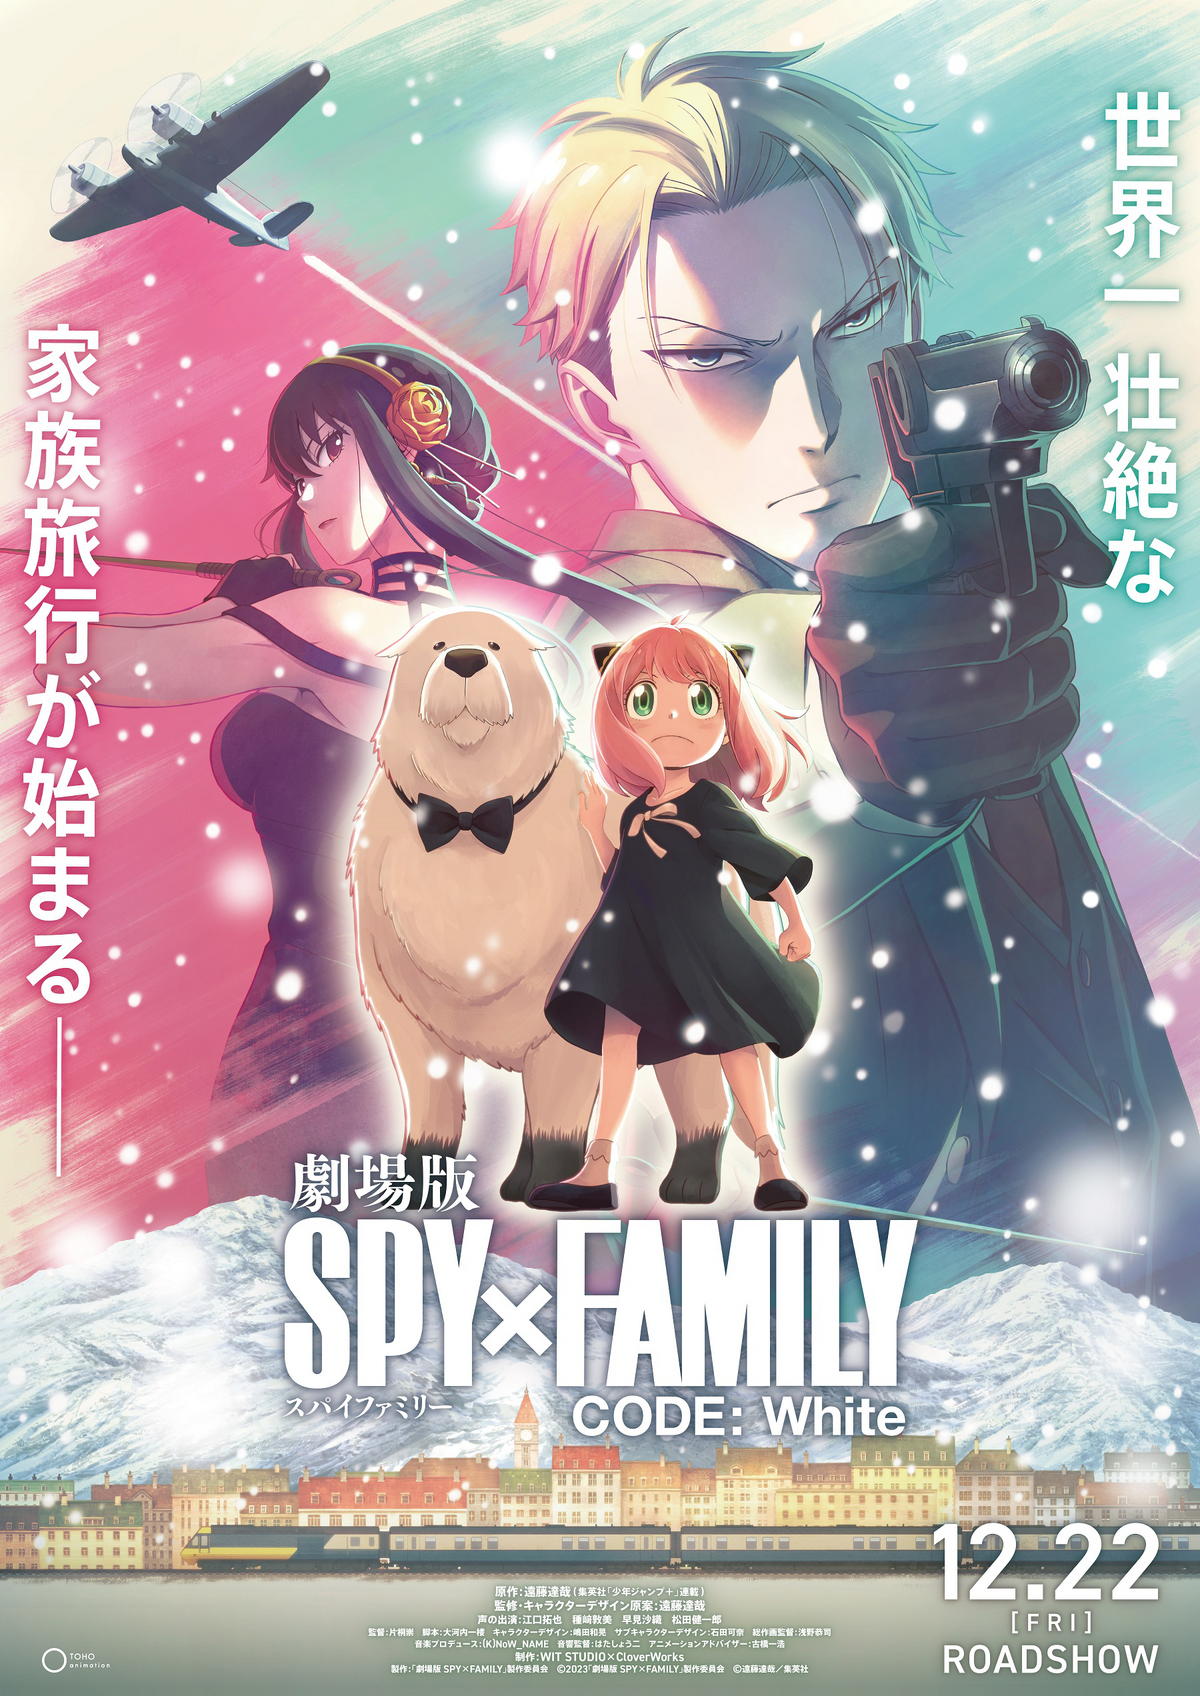 Spy x Family Episodes 1 - 25 English Dubbed Complete Seasons 1